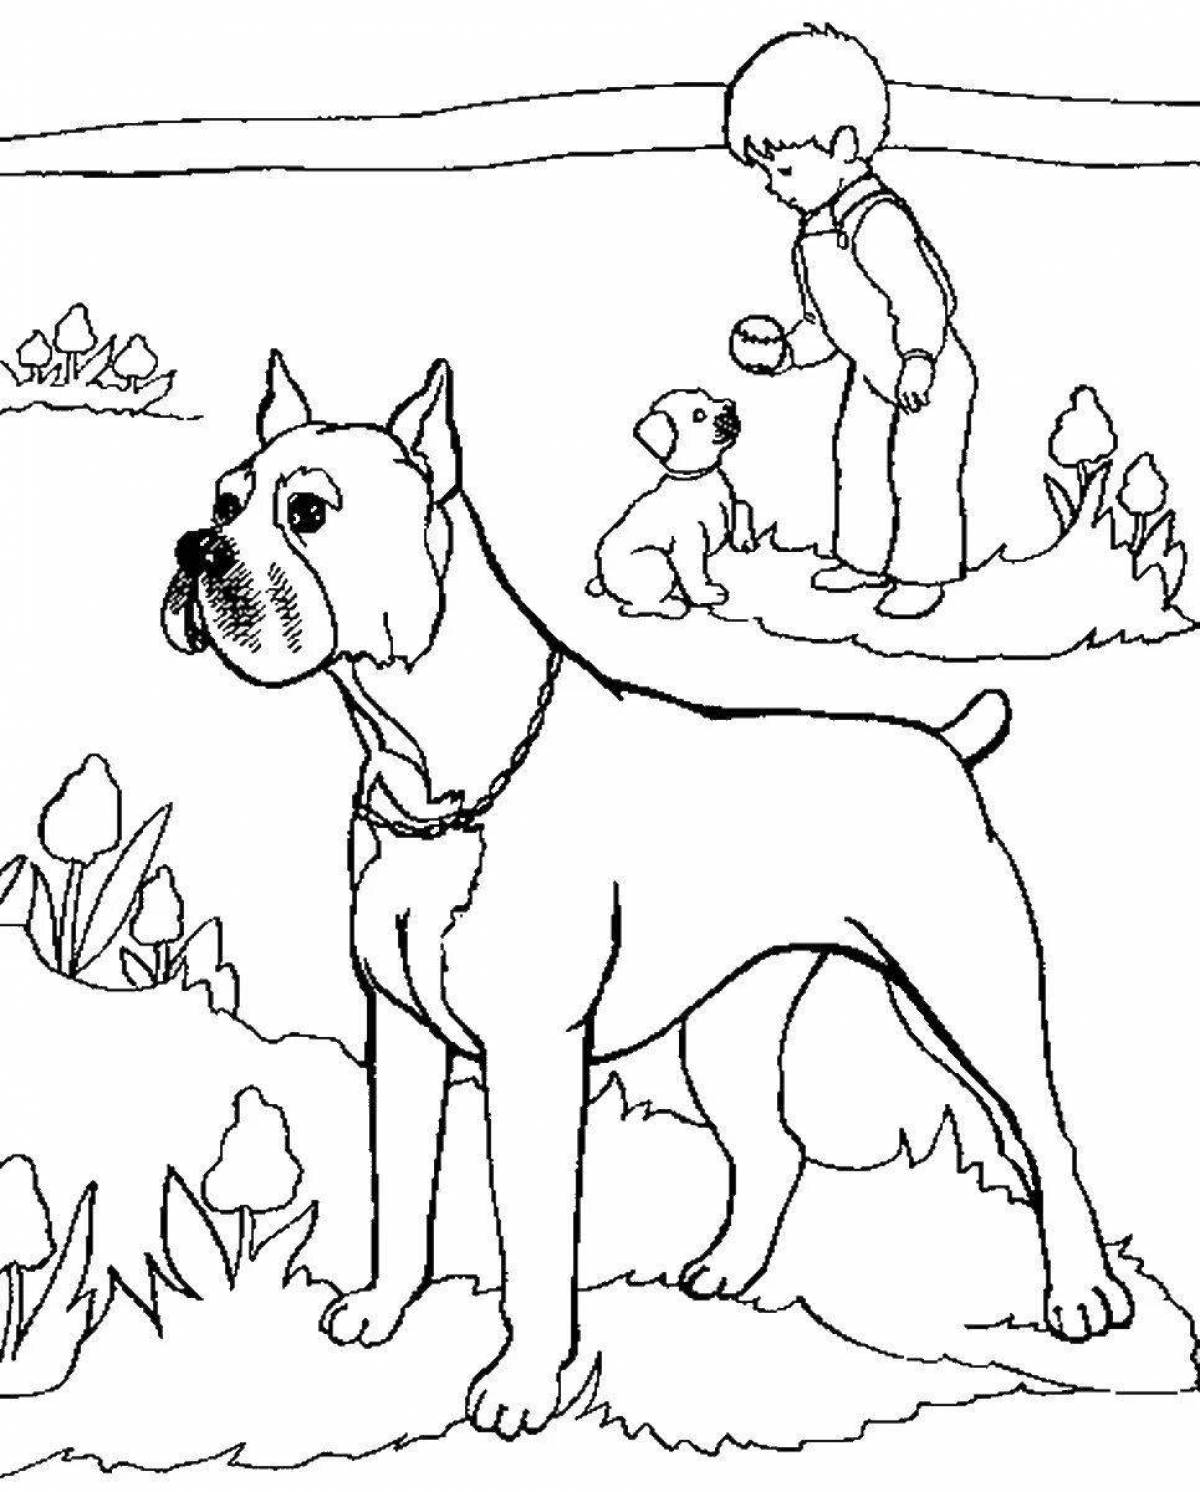 Coloring page happy service dogs for kids